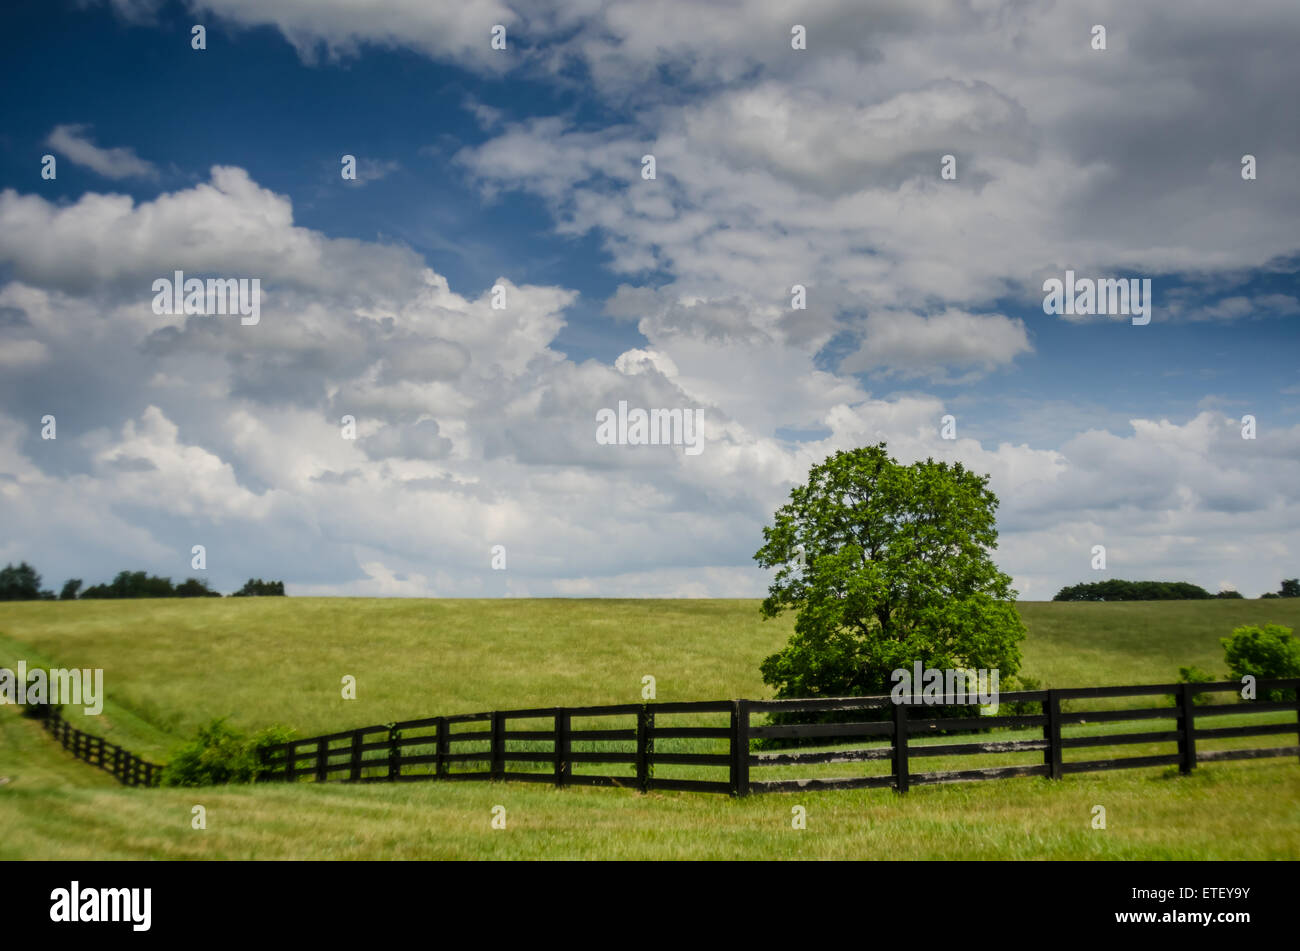 A vibrant green horse field on a summer afternoon in rural Kentucky Stock Photo